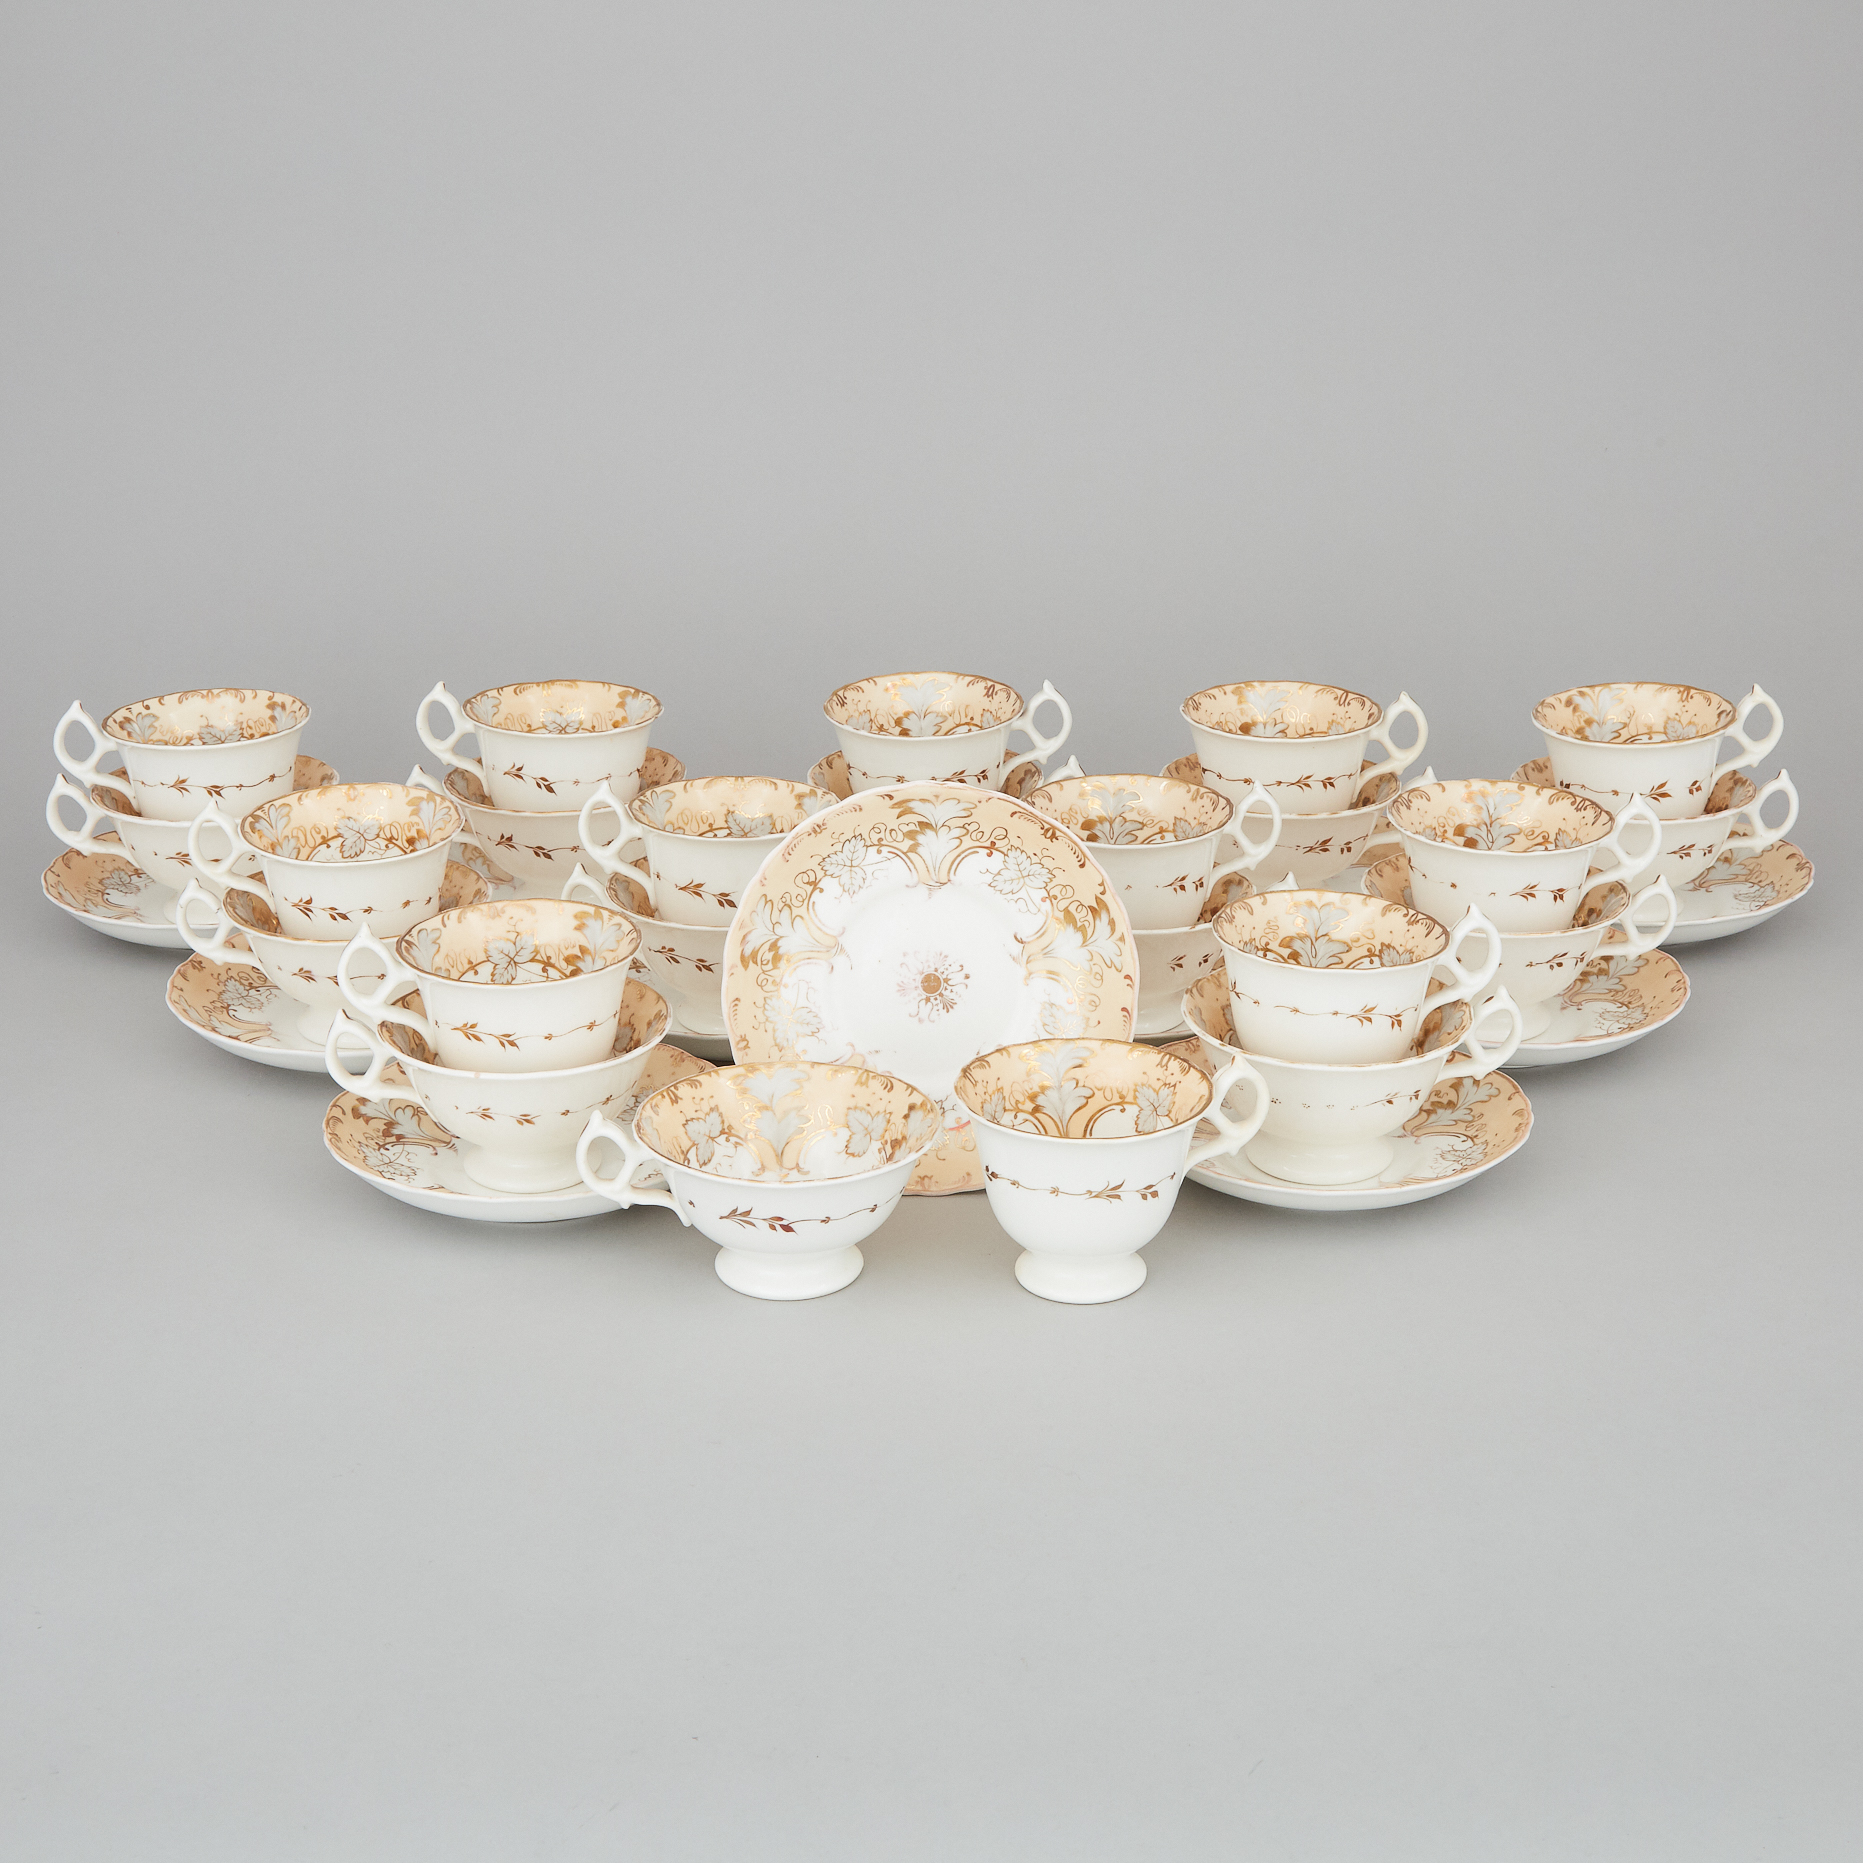 Twelve English Porcelain Apricot and Gilt Decorated Tea Cups, Coffee Cups and Saucers, mid-19th century